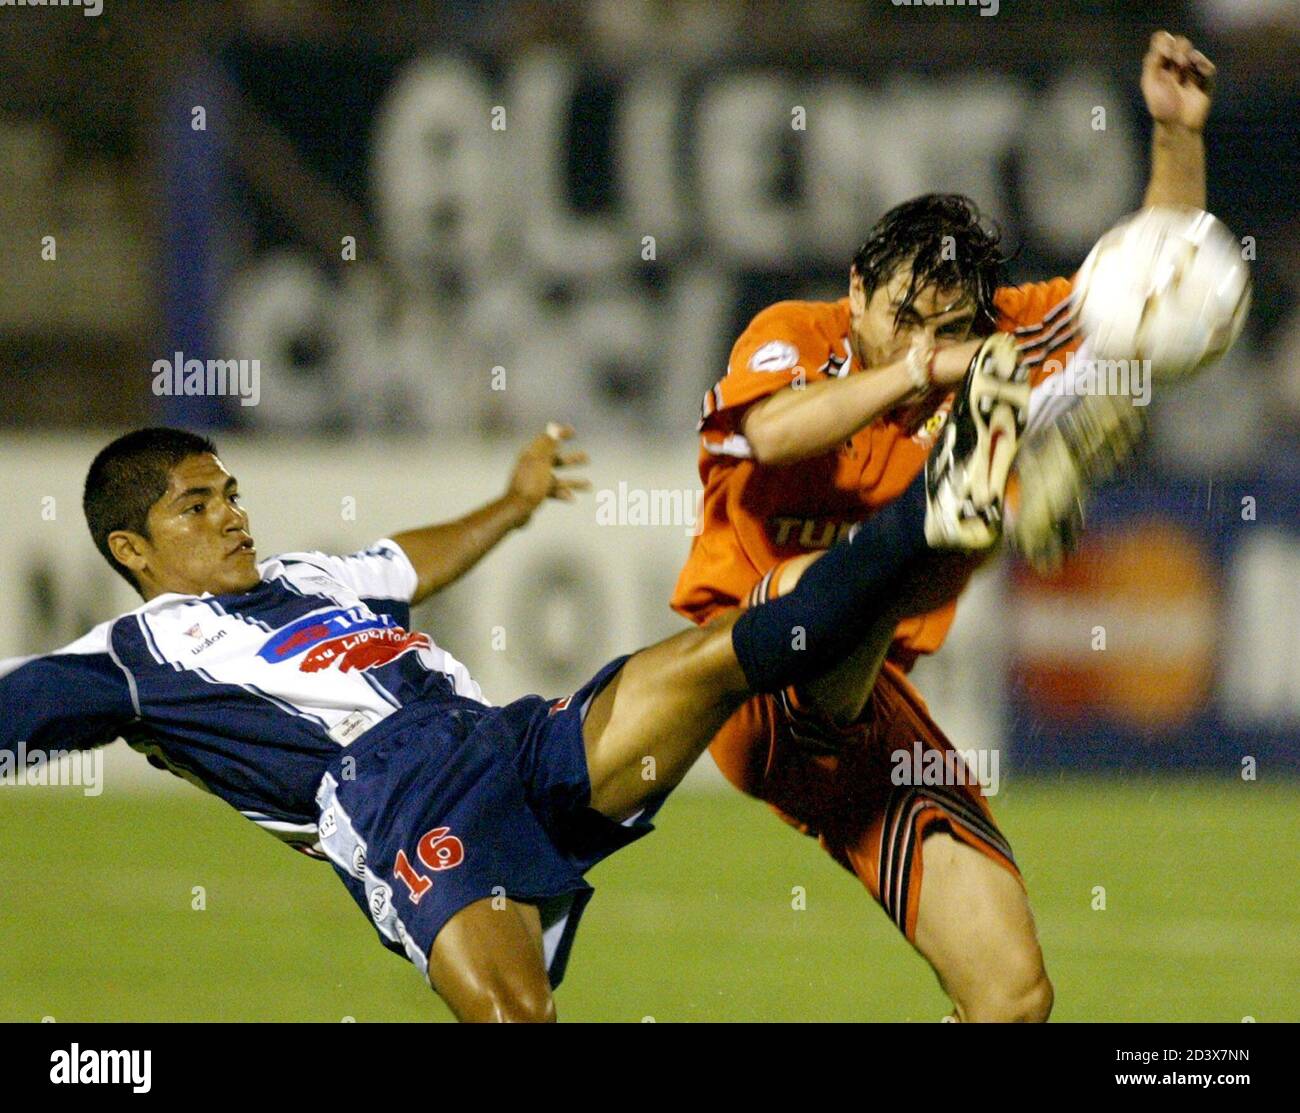 Chilean Jaime Gonzalez (R) from Cobreloa club fights for the ball with  Peruvian Cristian Garcia from Alianza Lima during their soccer match for  Libertadores at Matute stadium in Lima, March 5, 2003.